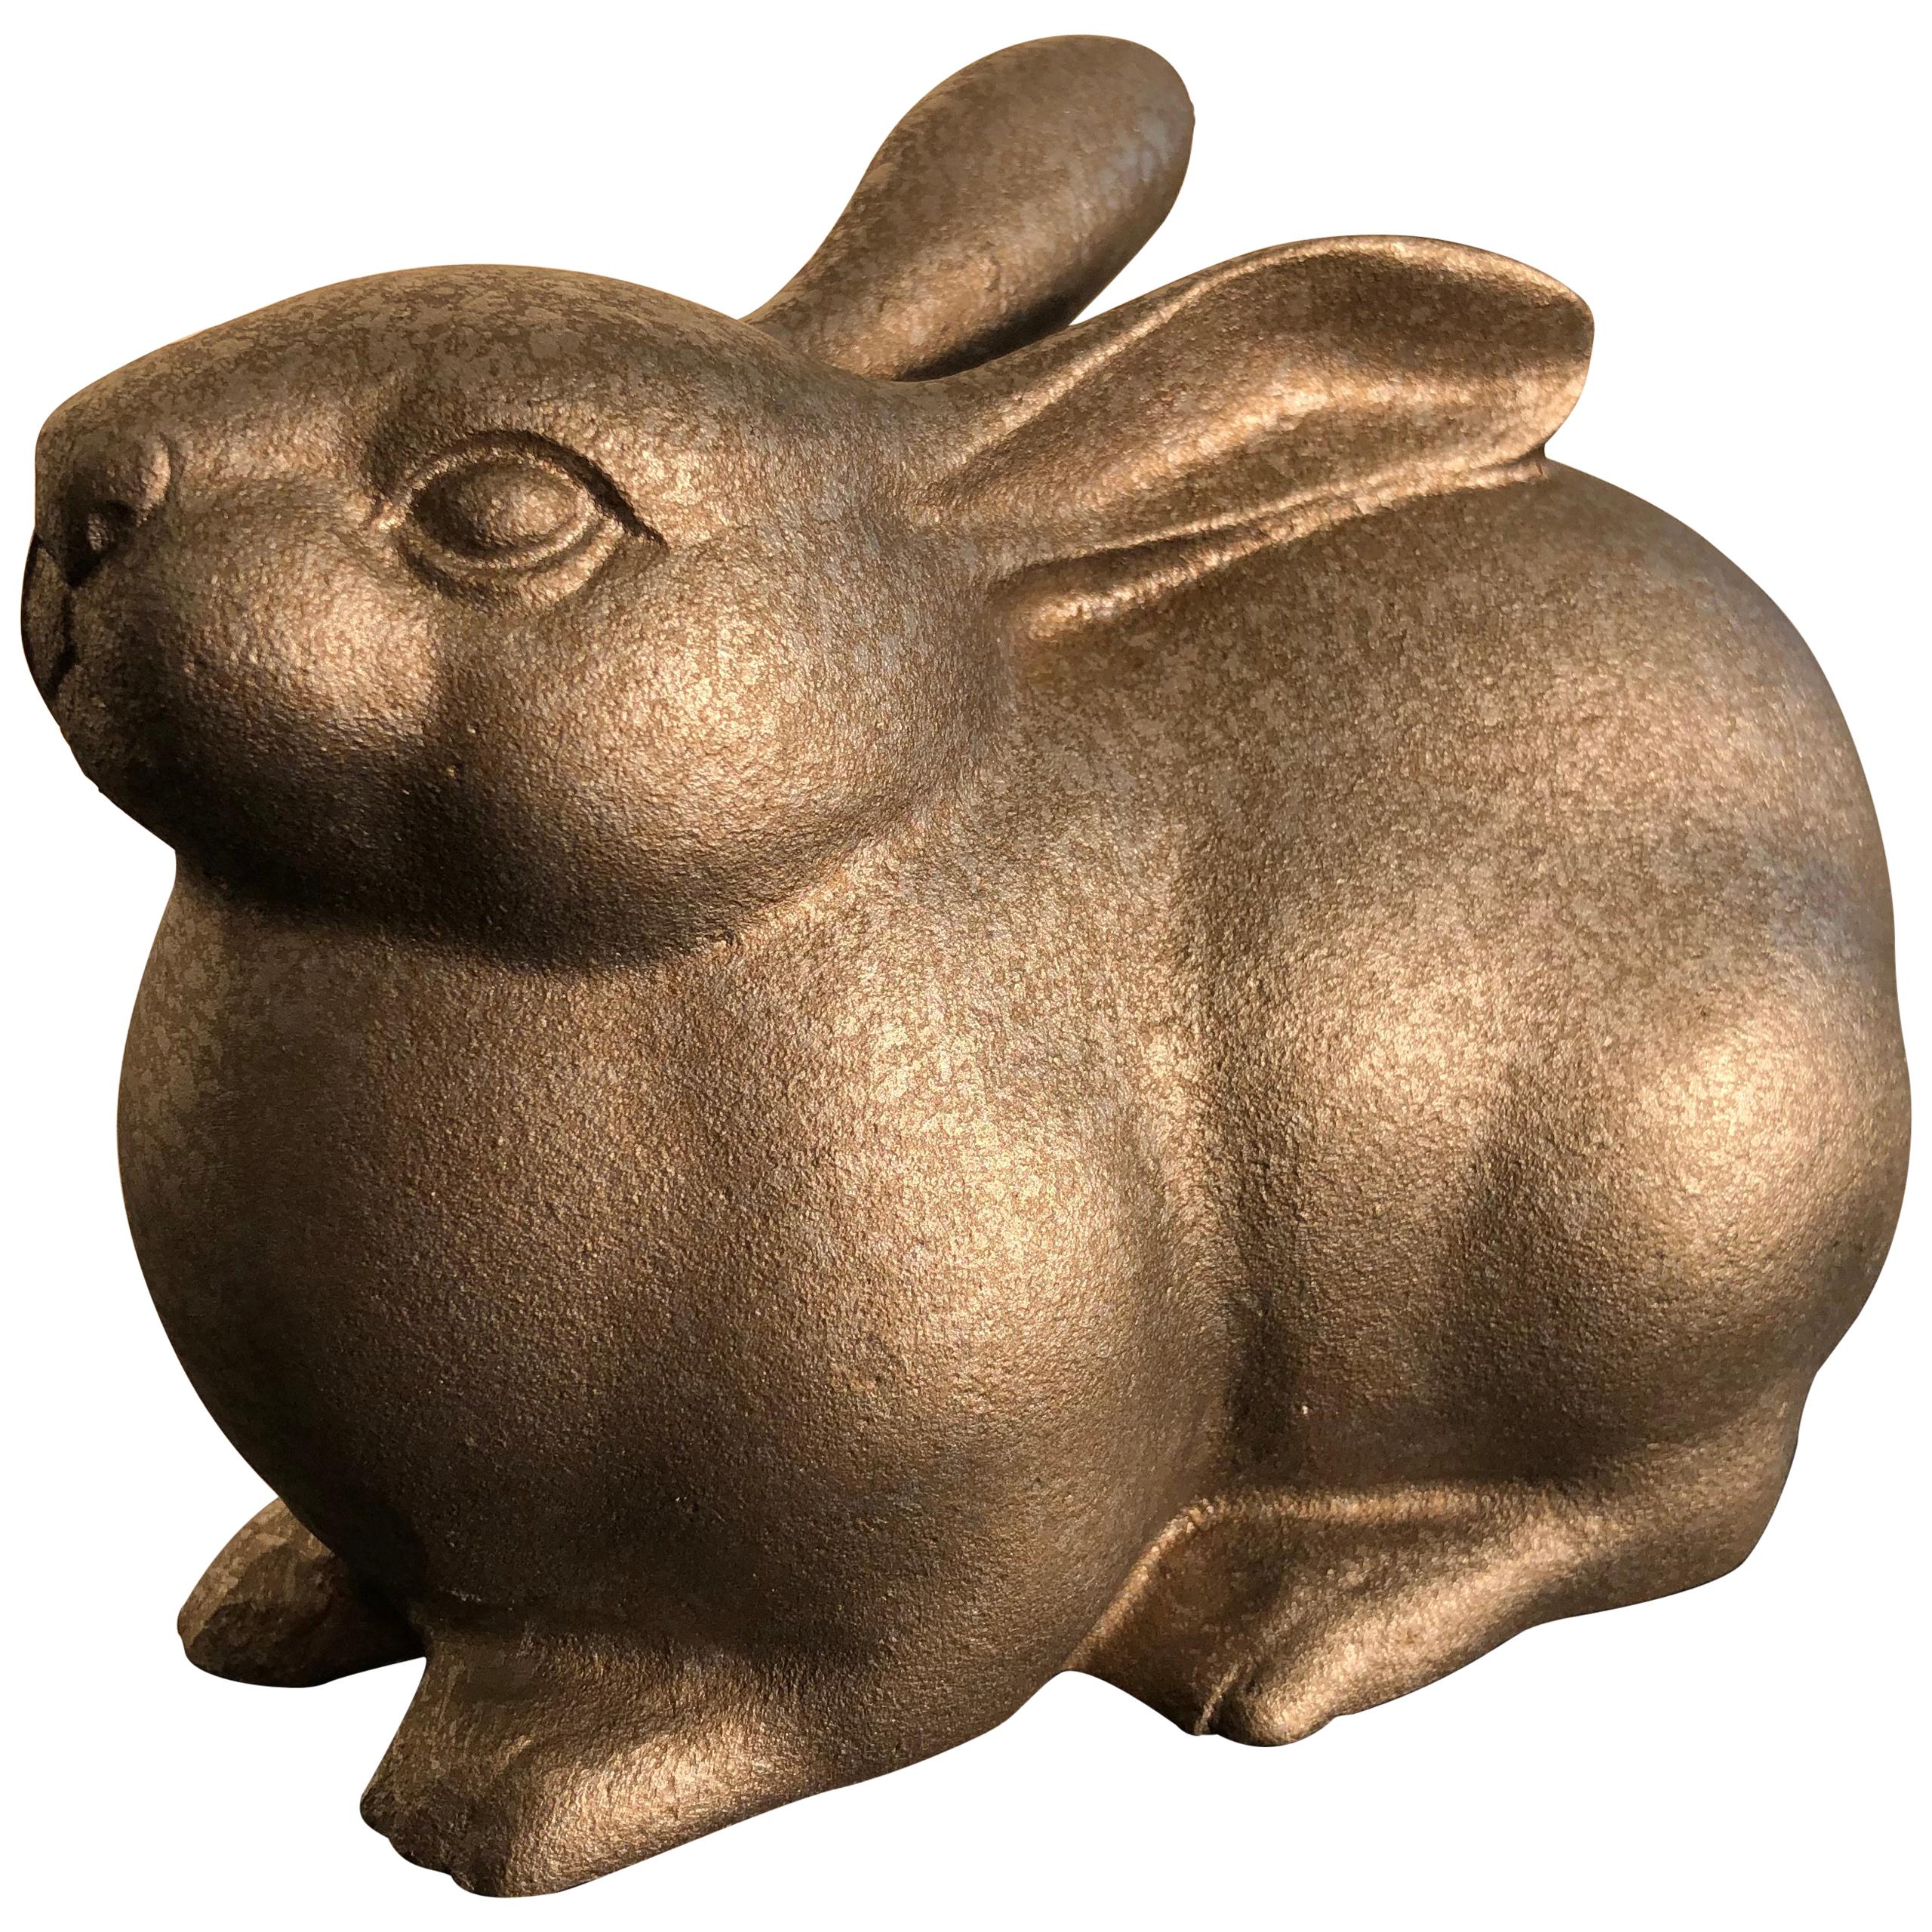 Big Bold Alert Rabbit from Japan, Handsome and Finely Sculpted